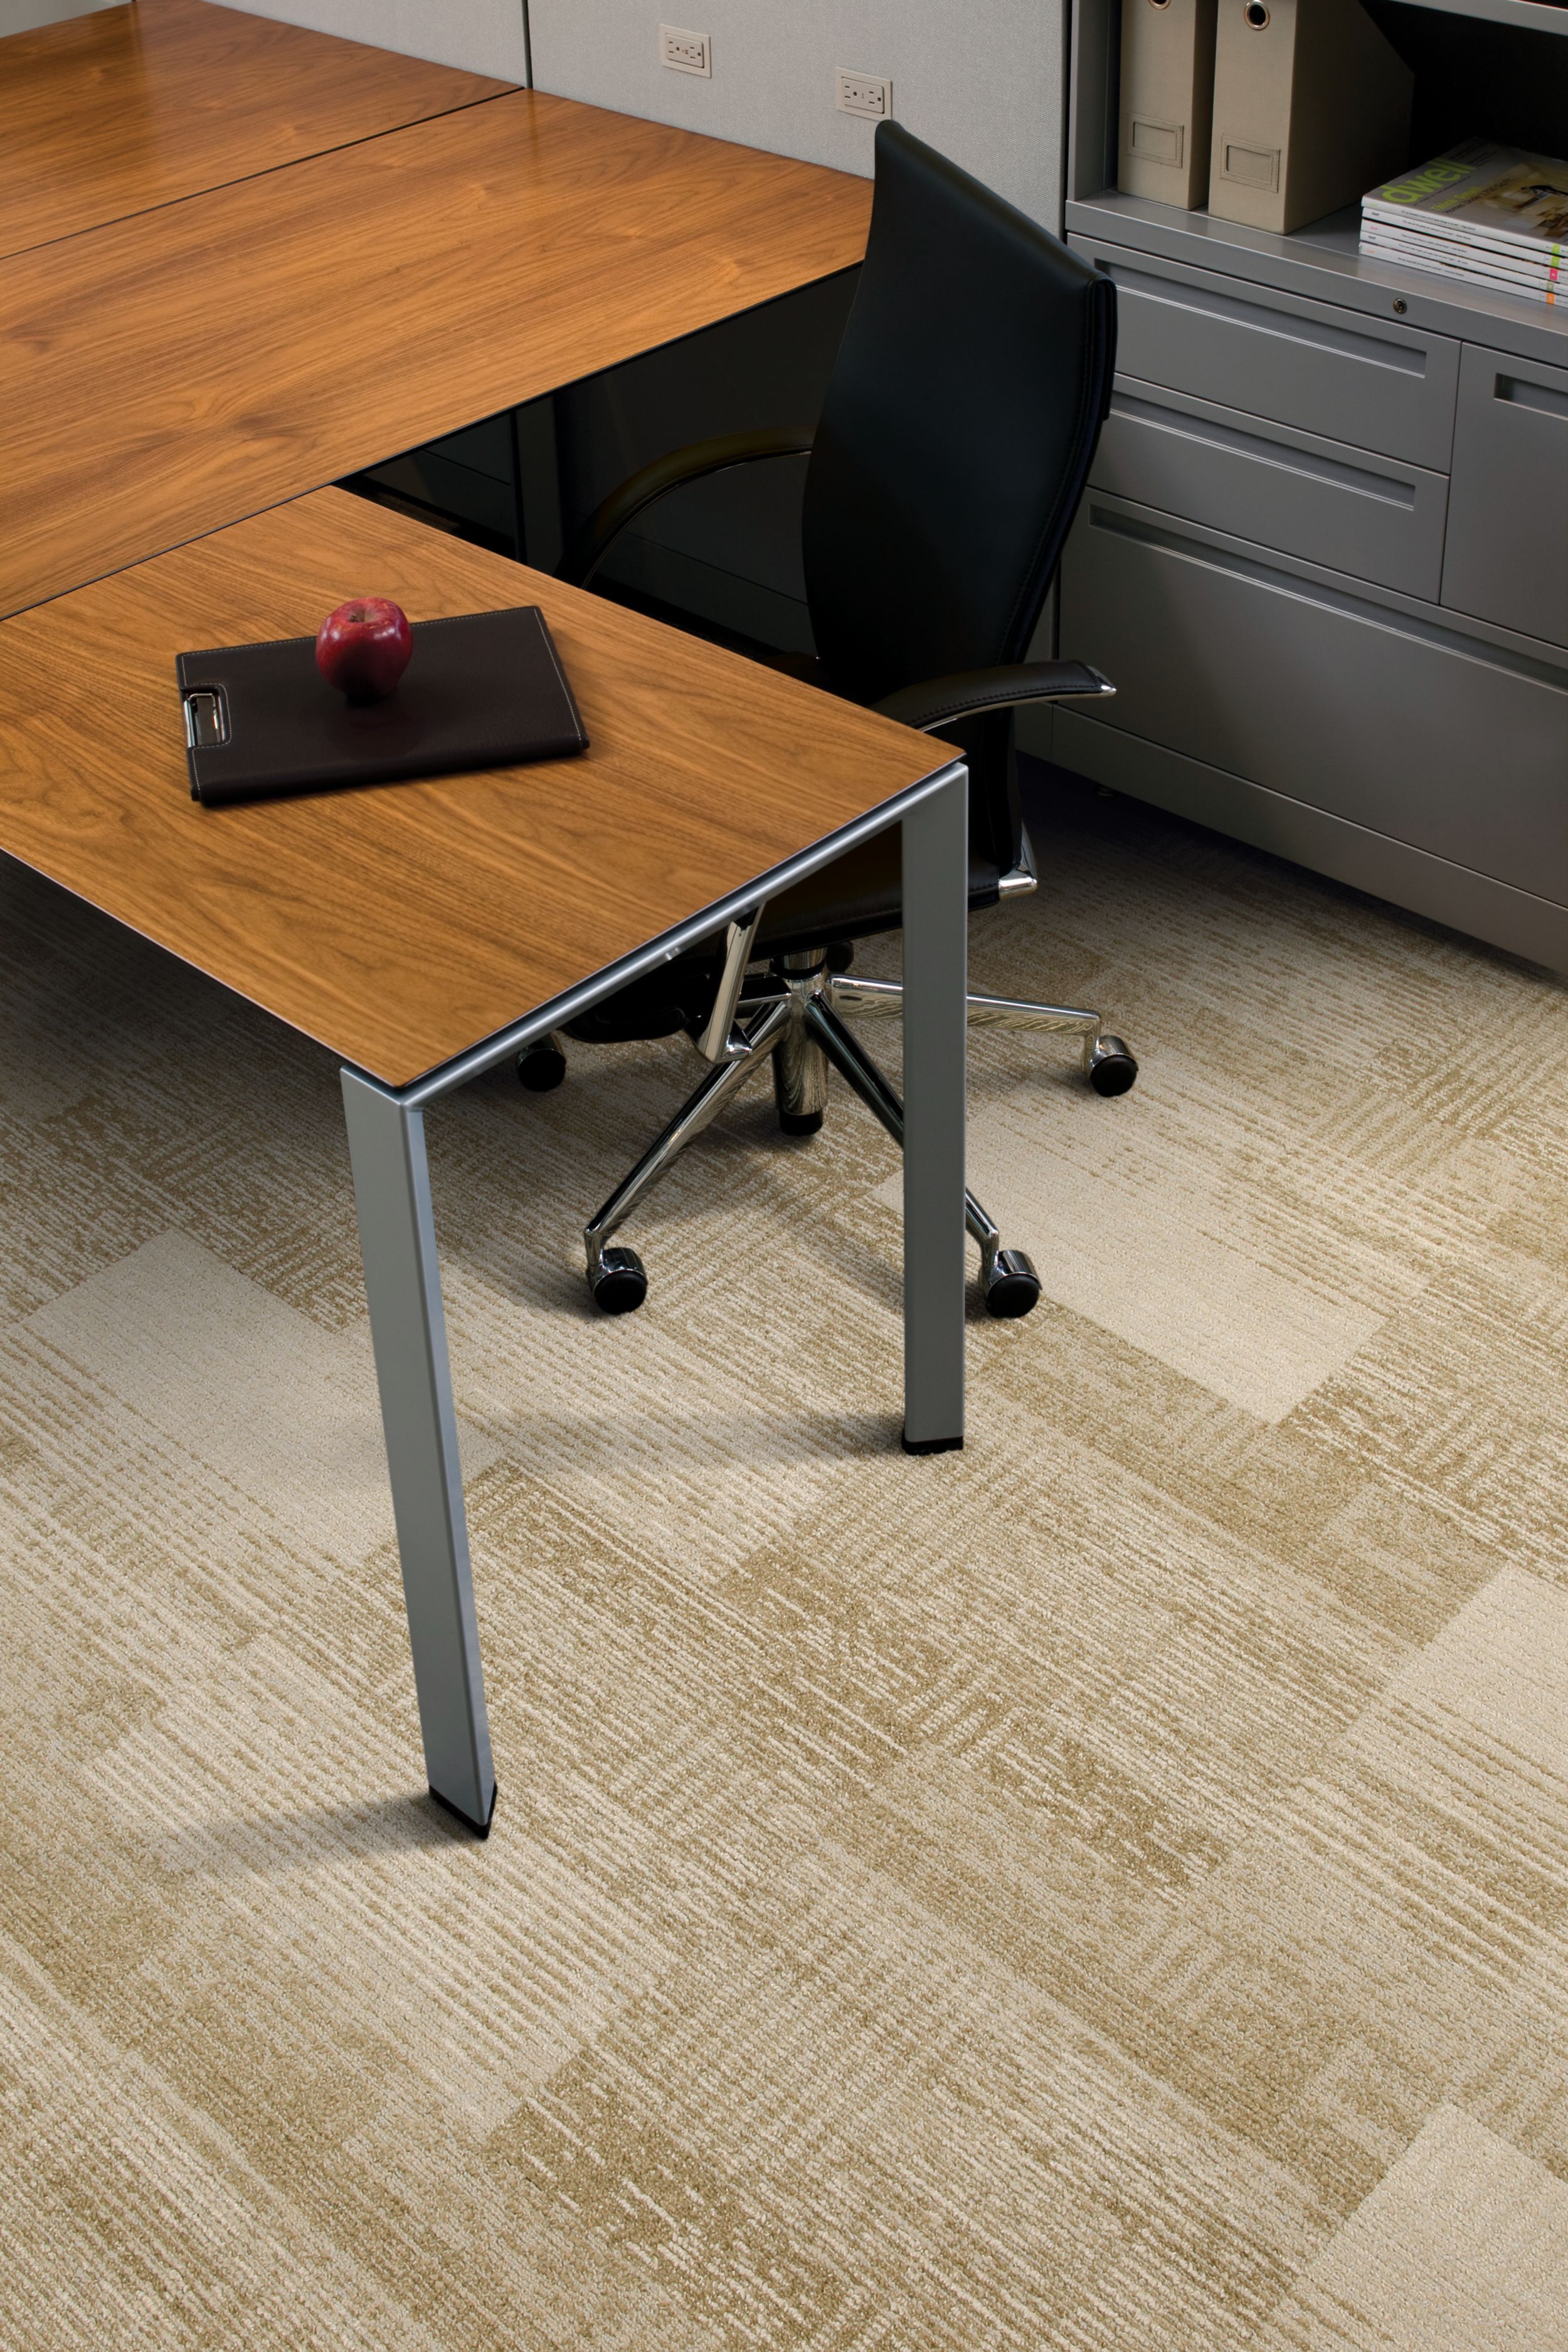 Interface Plain Weave carpet tile in small work area with desk, chair, and cabinets imagen número 1